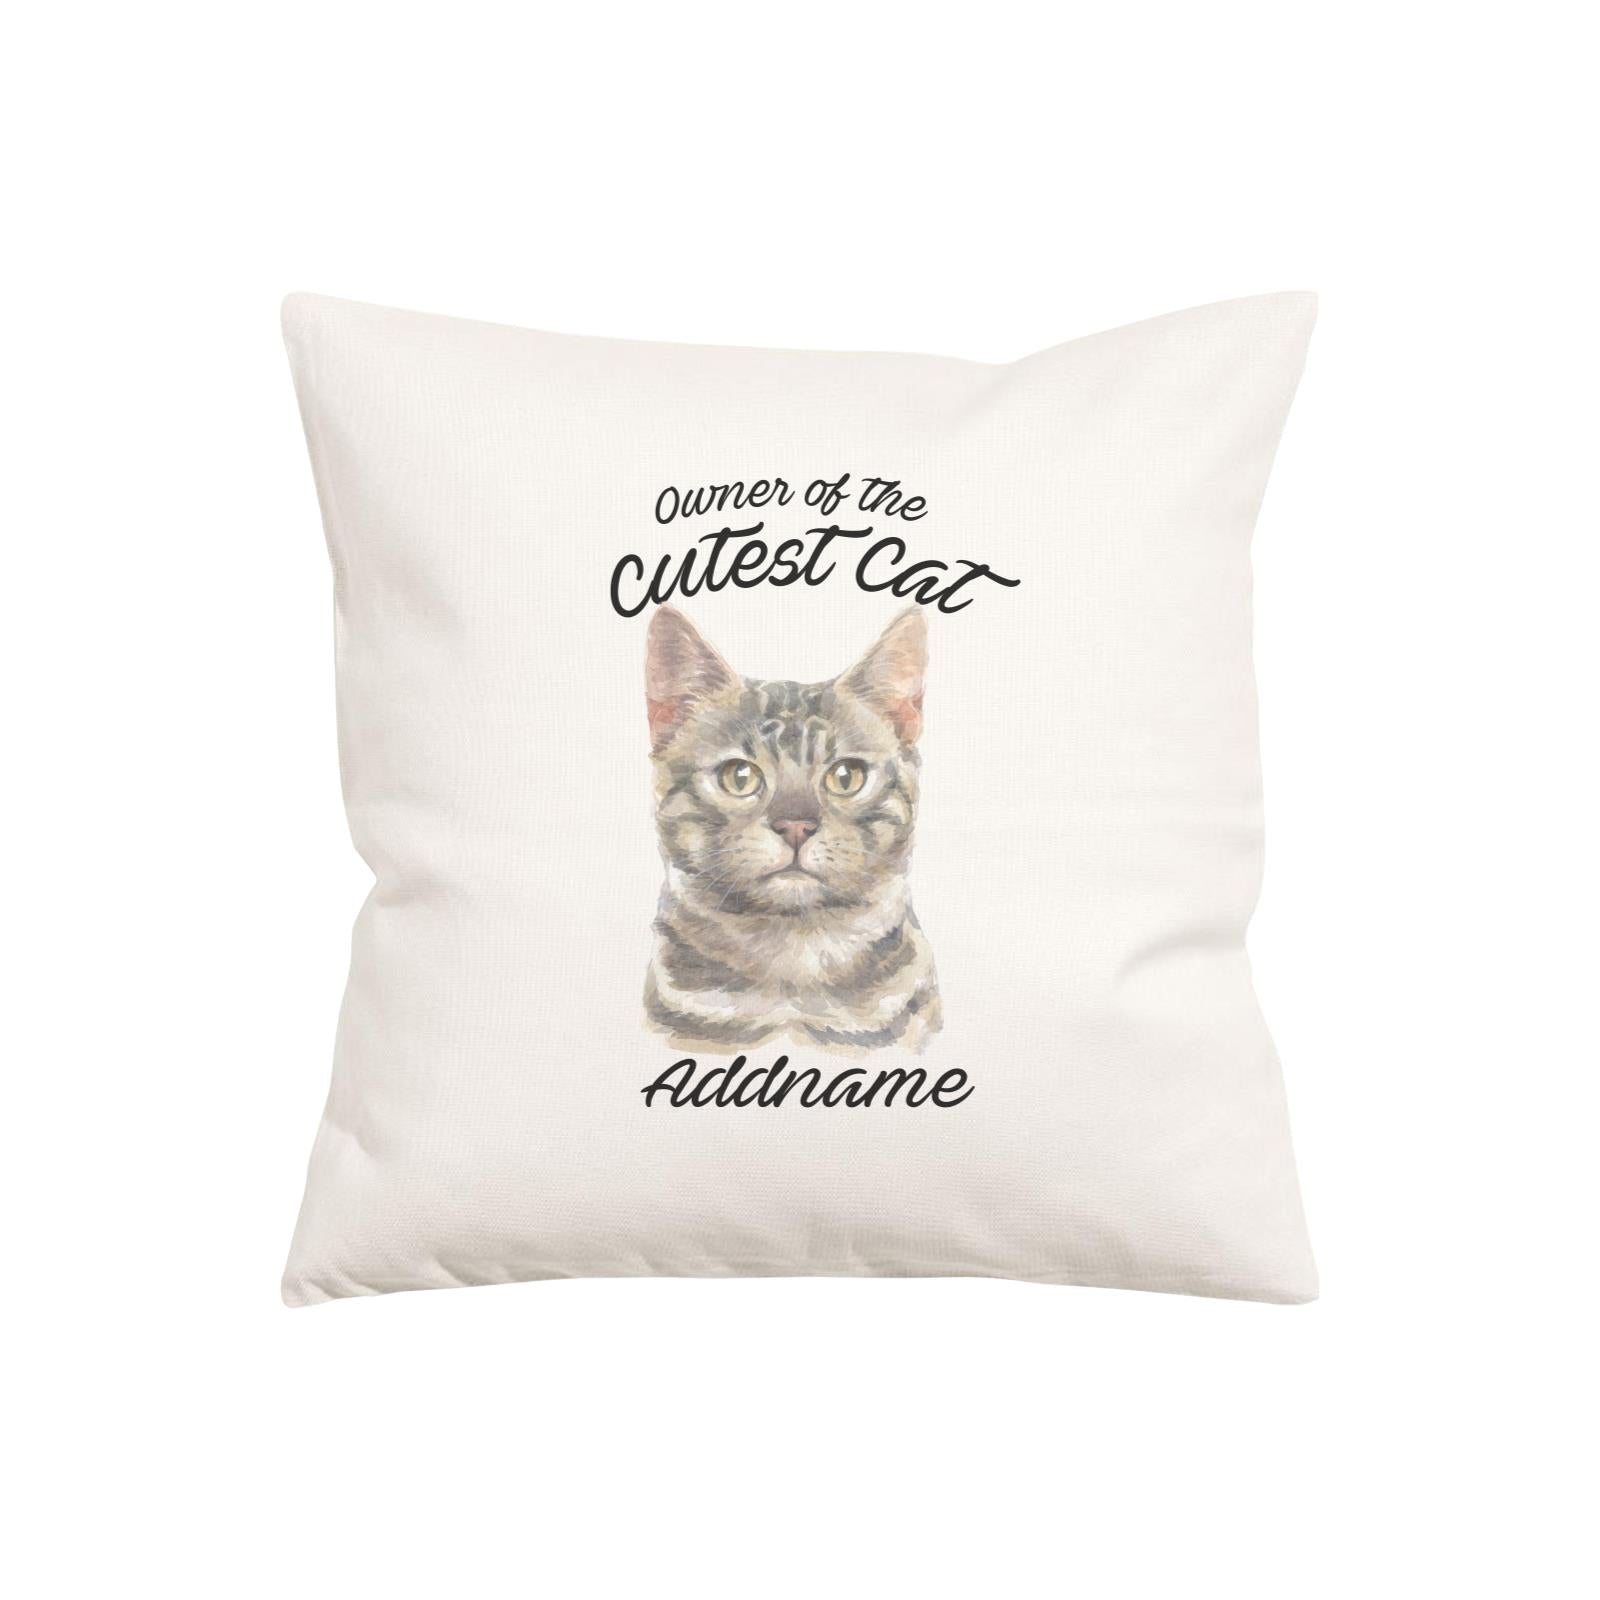 Watercolor Owner Of The Cutest Cat Bengal Grey Addname Pillow Cushion